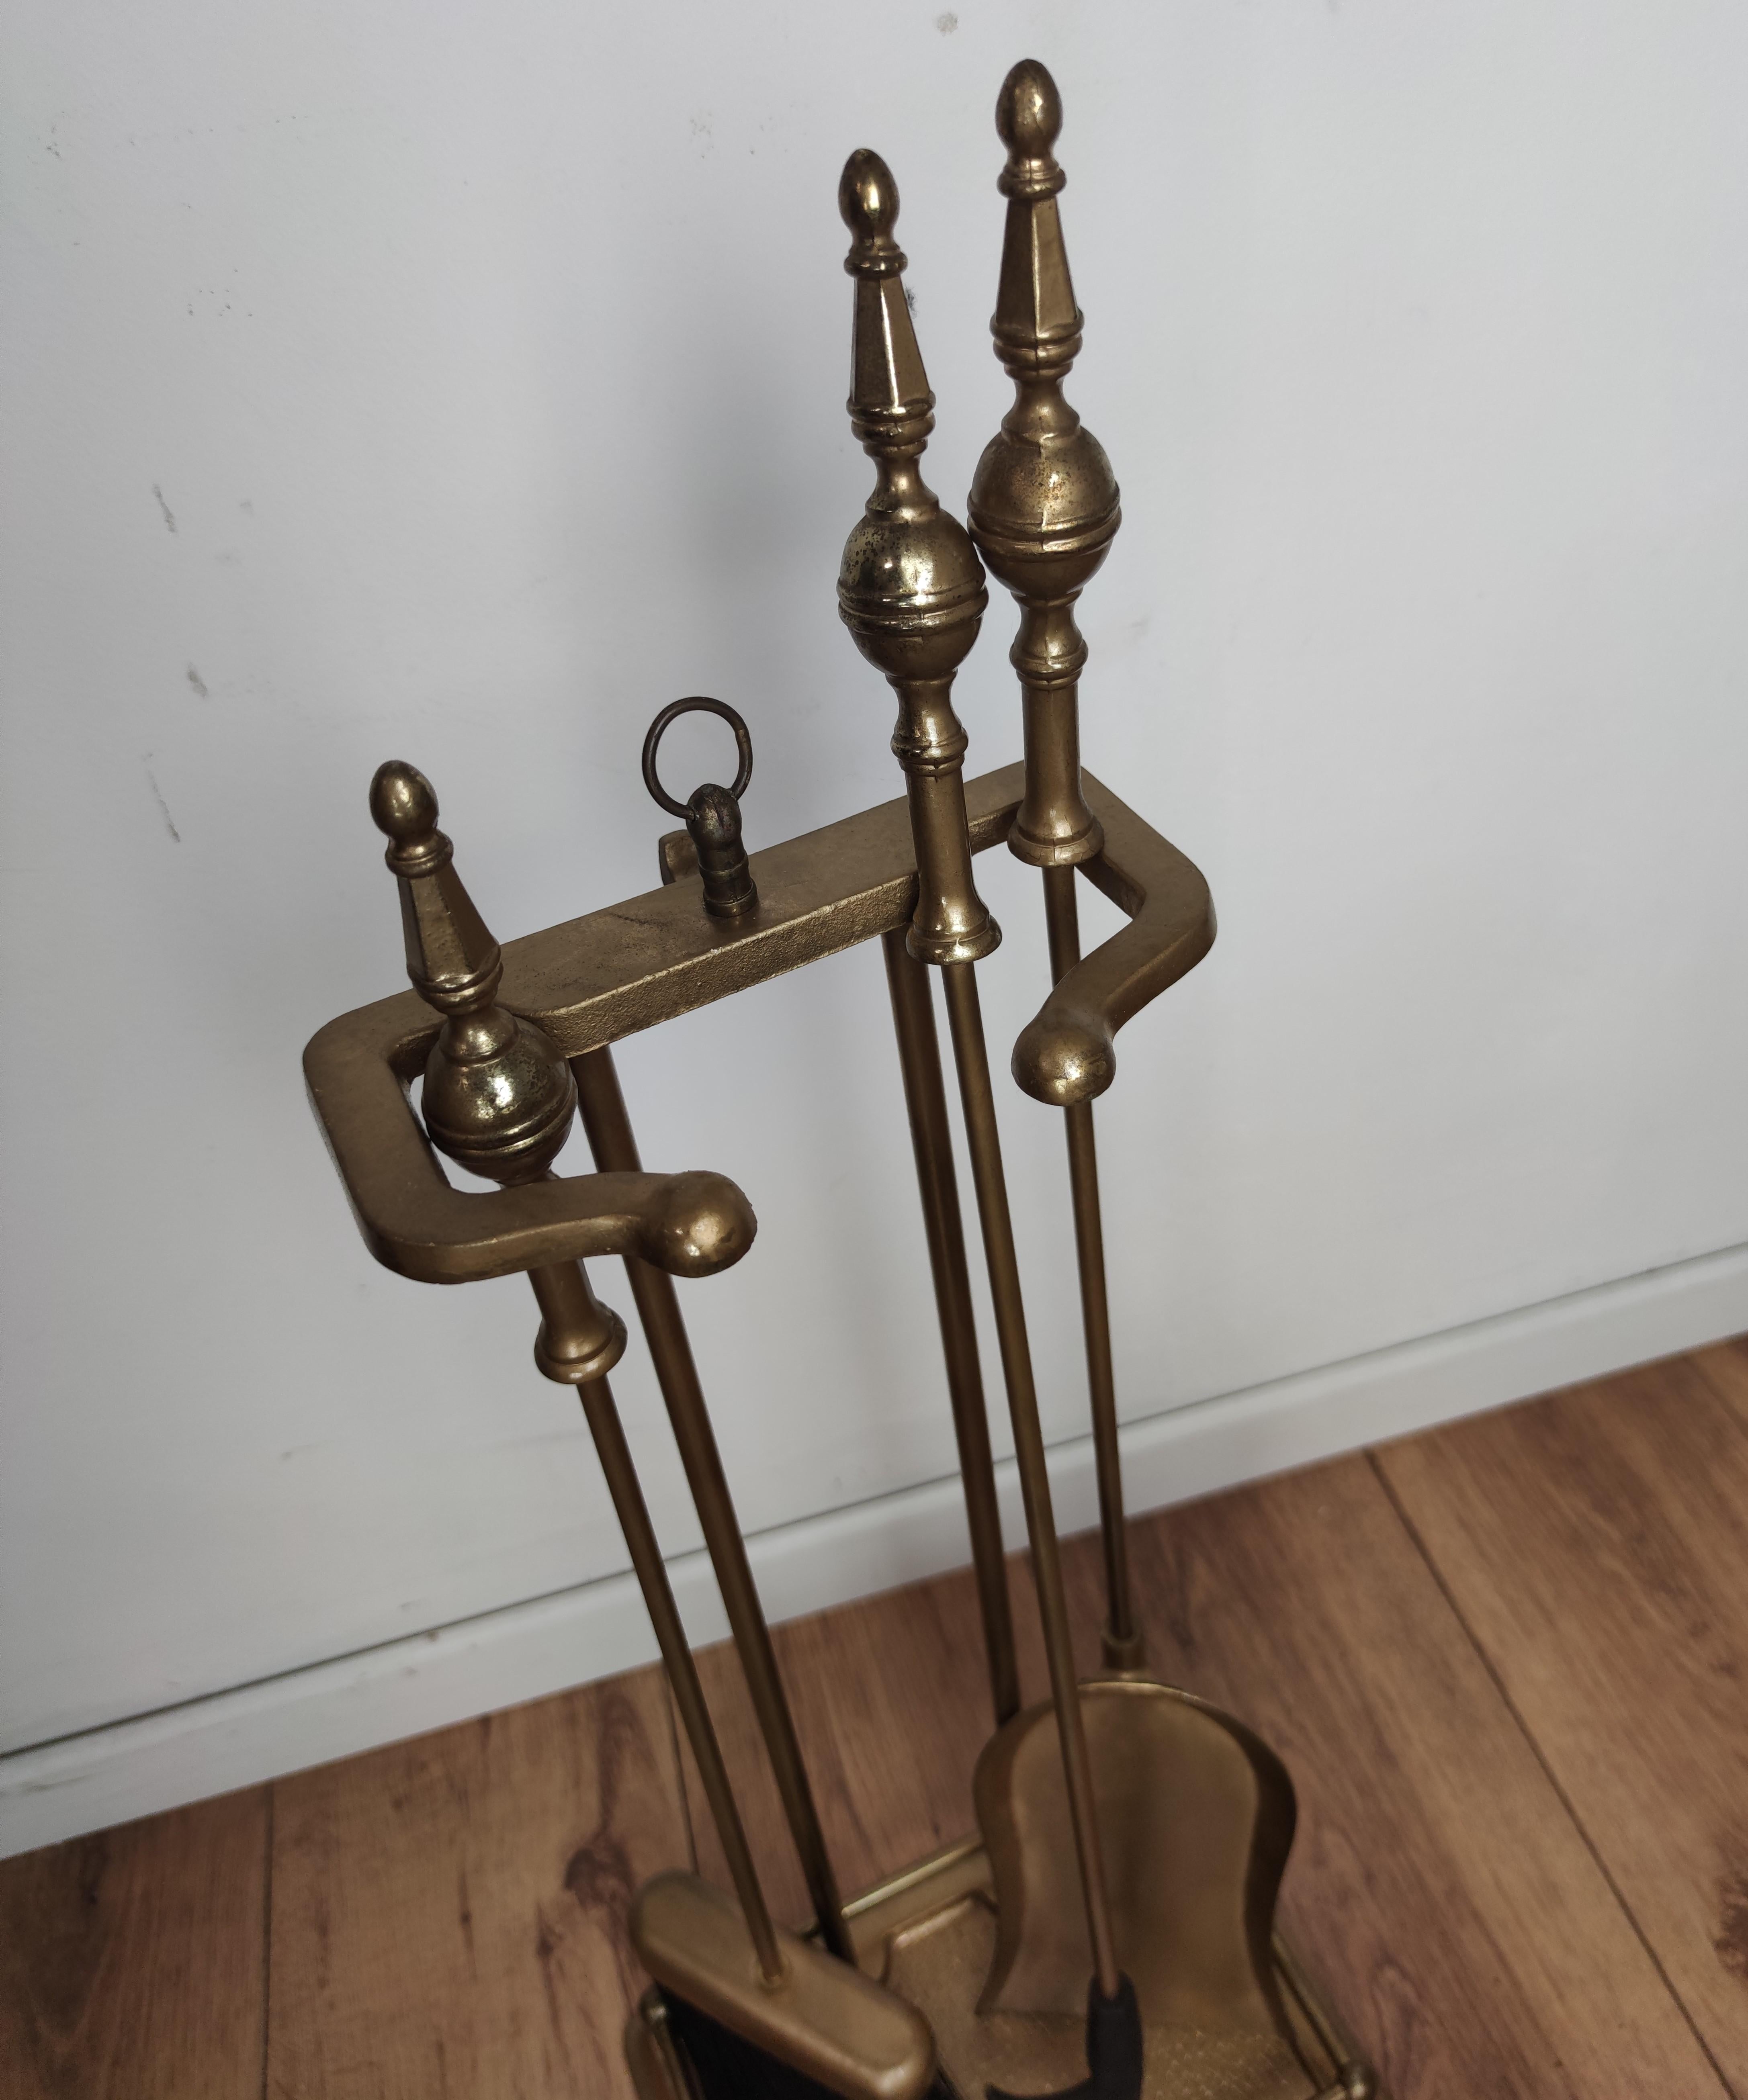 Three-Piece Brass Vintage Fire Tool Set with Stand 1